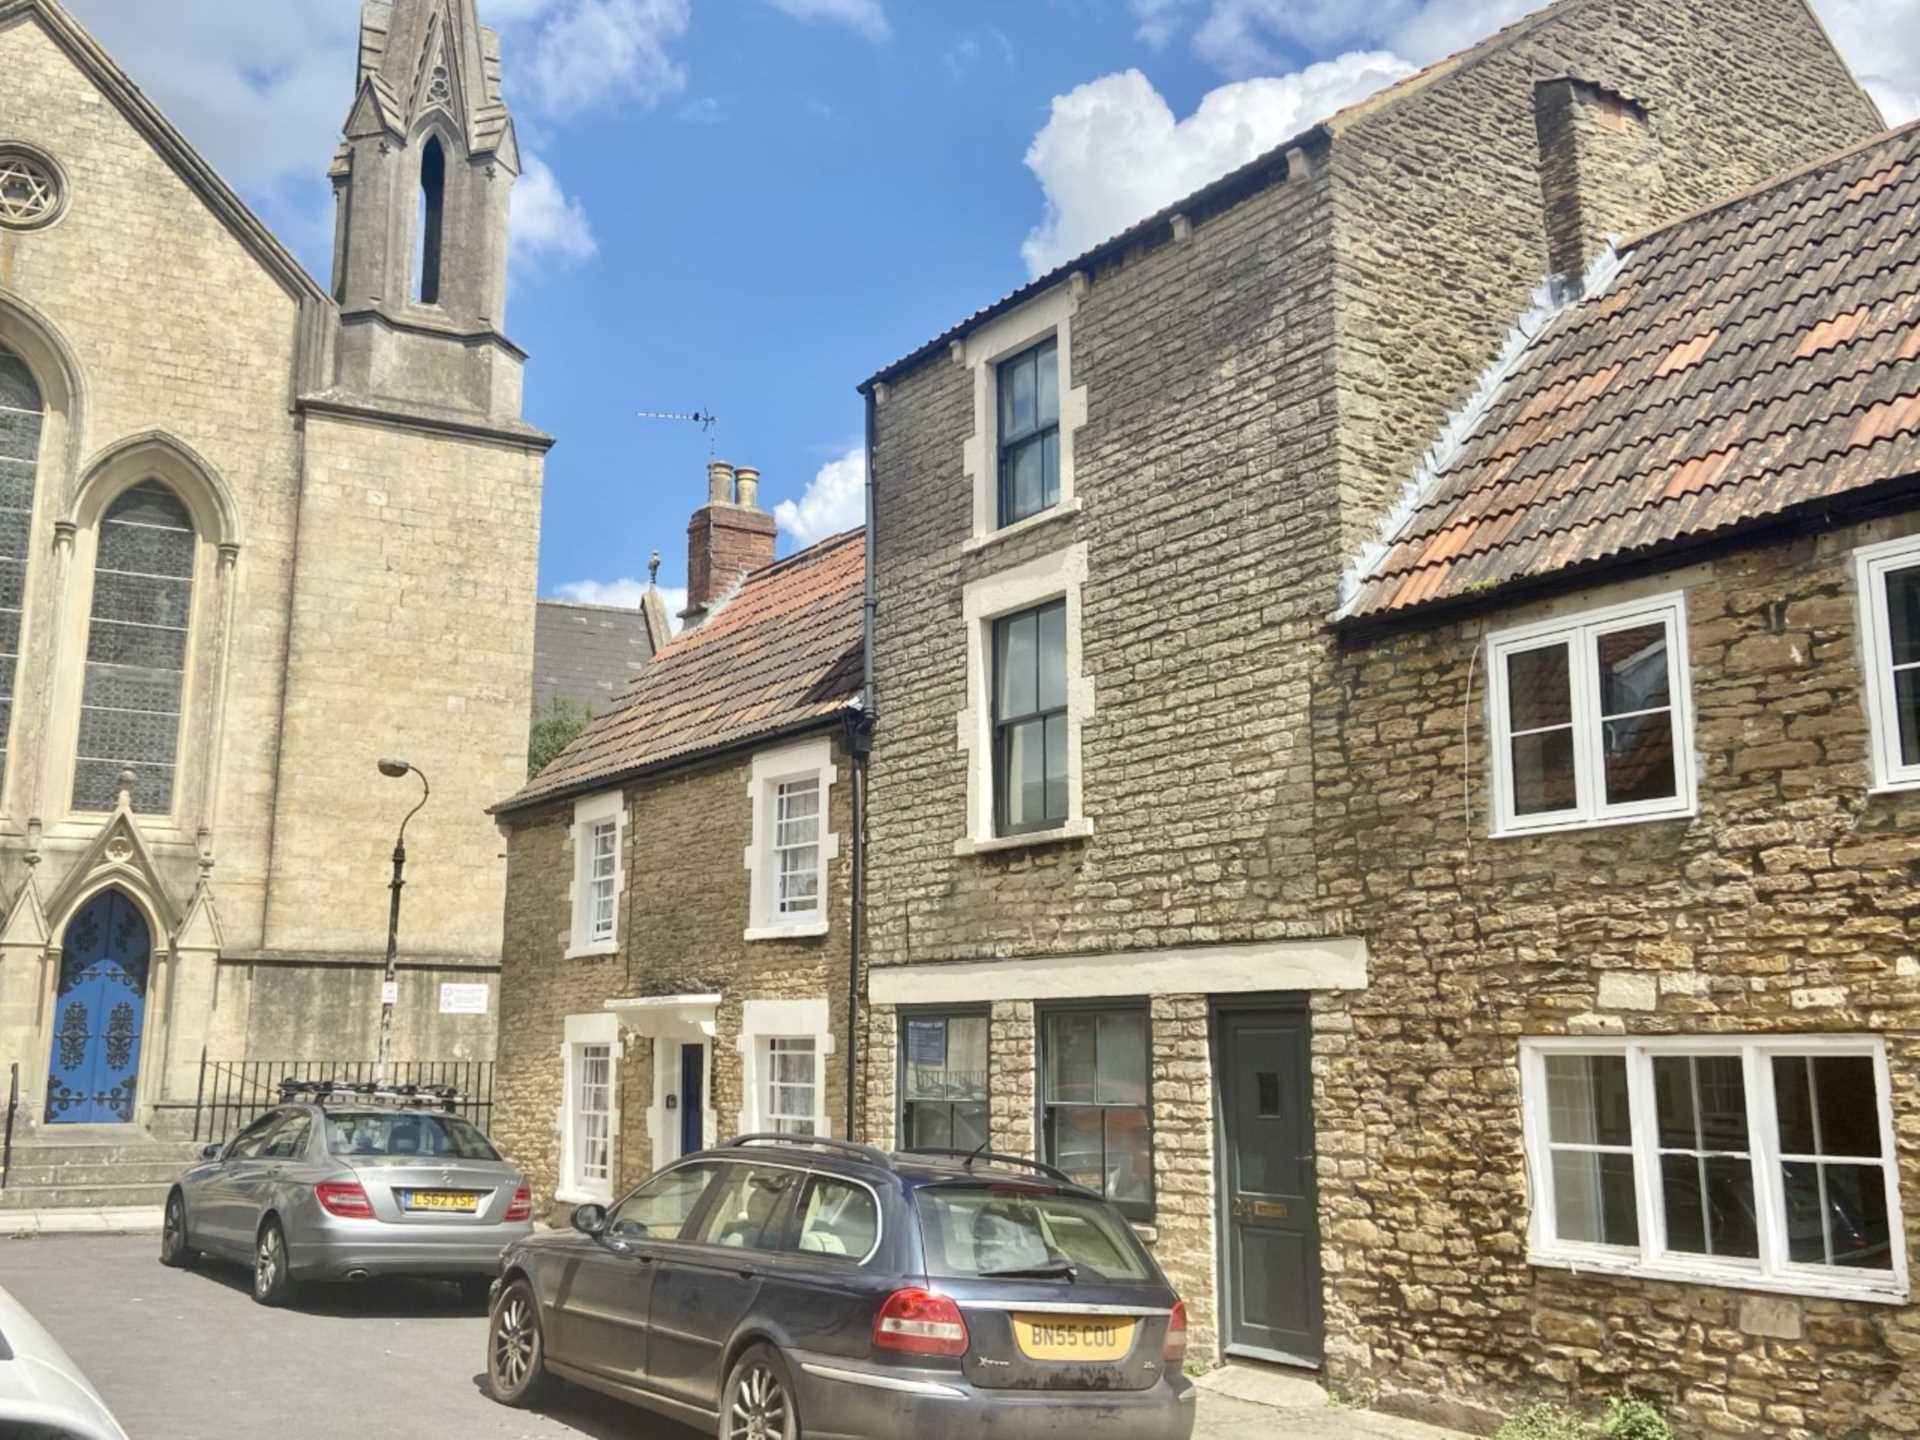 4 bed Mid Terraced House for rent in Frome. From Swallows Property Letting - Frome